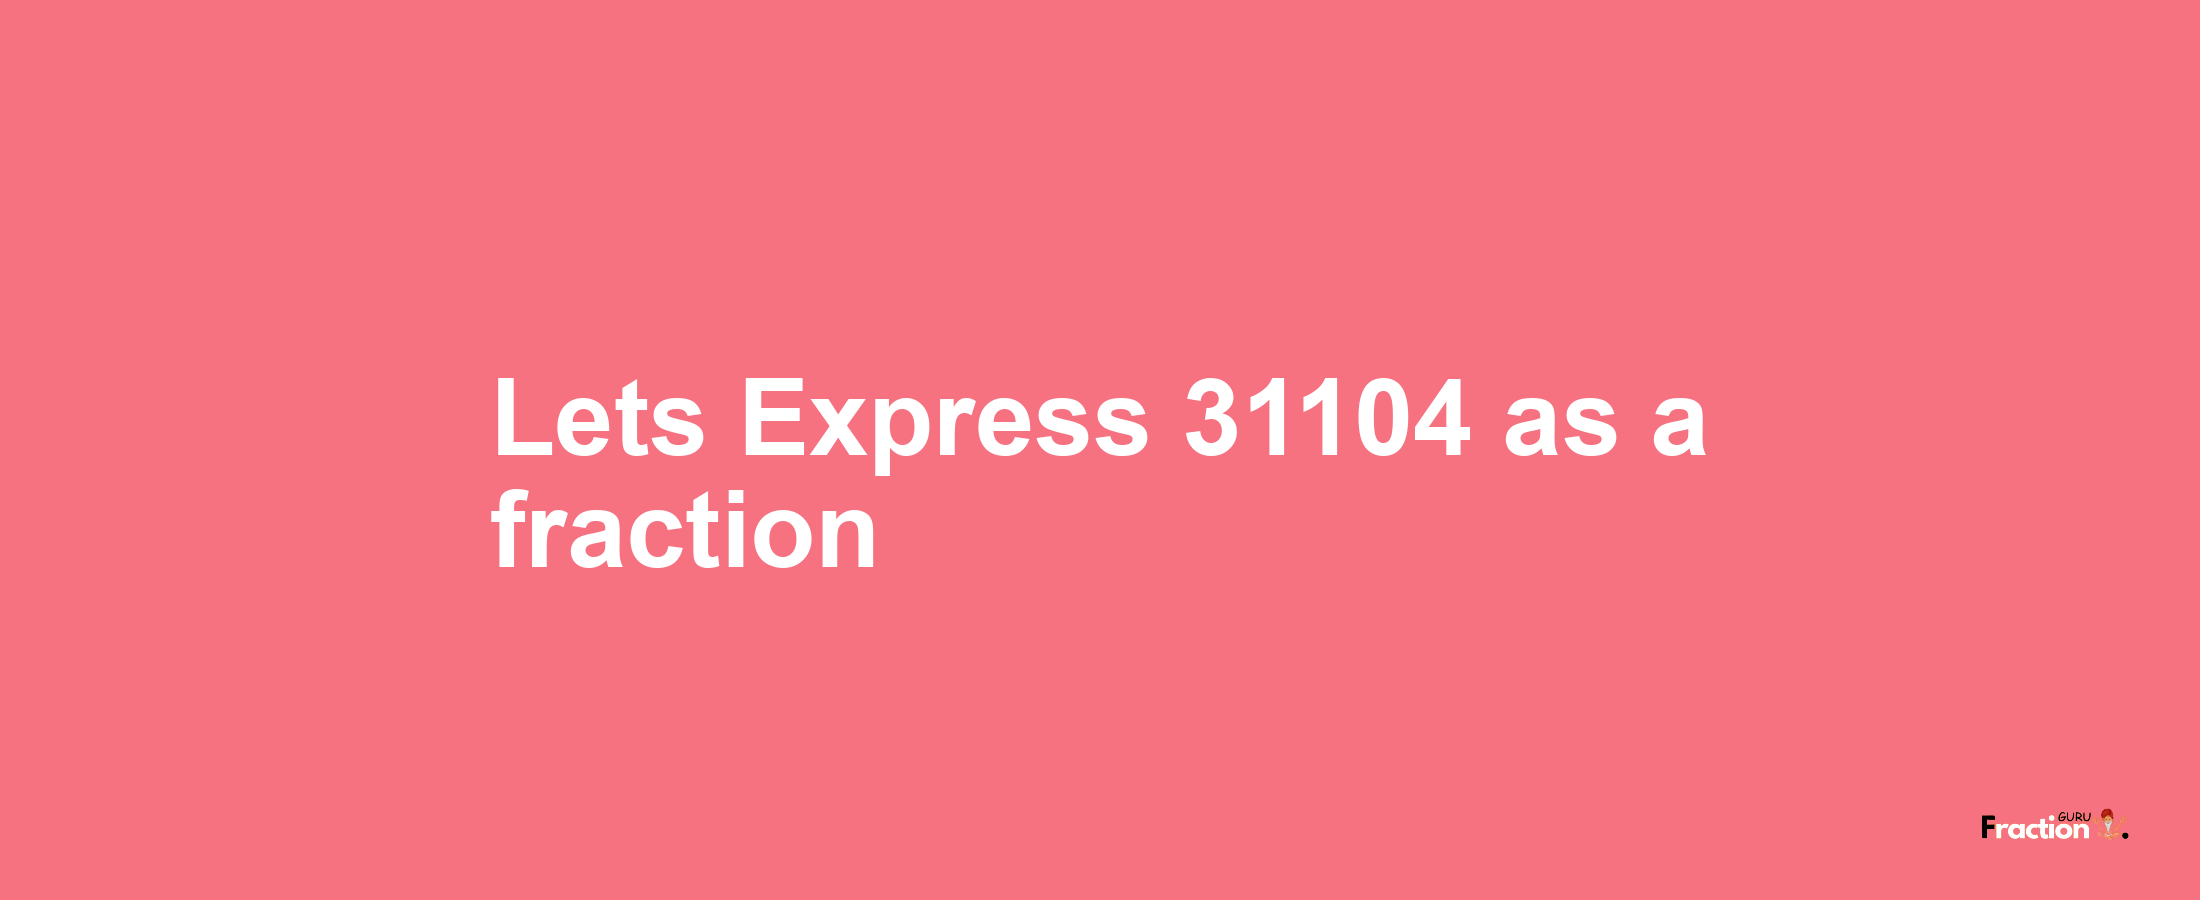 Lets Express 31104 as afraction